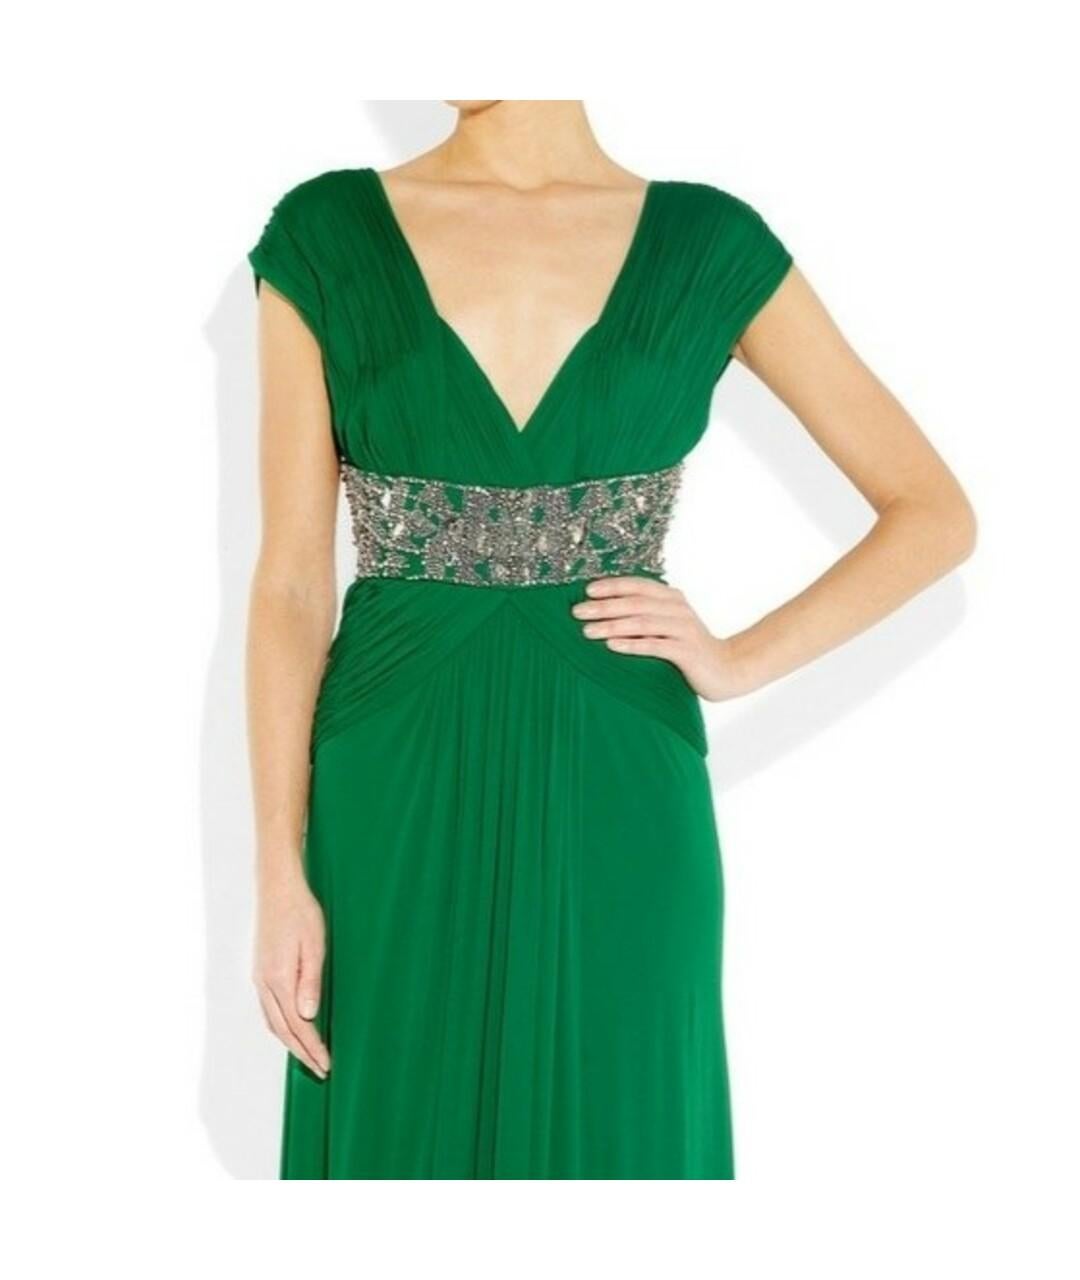 Green ROBERTO CAVALLI GREEN GOWN DRESS DECORATED with STONES  EU 38